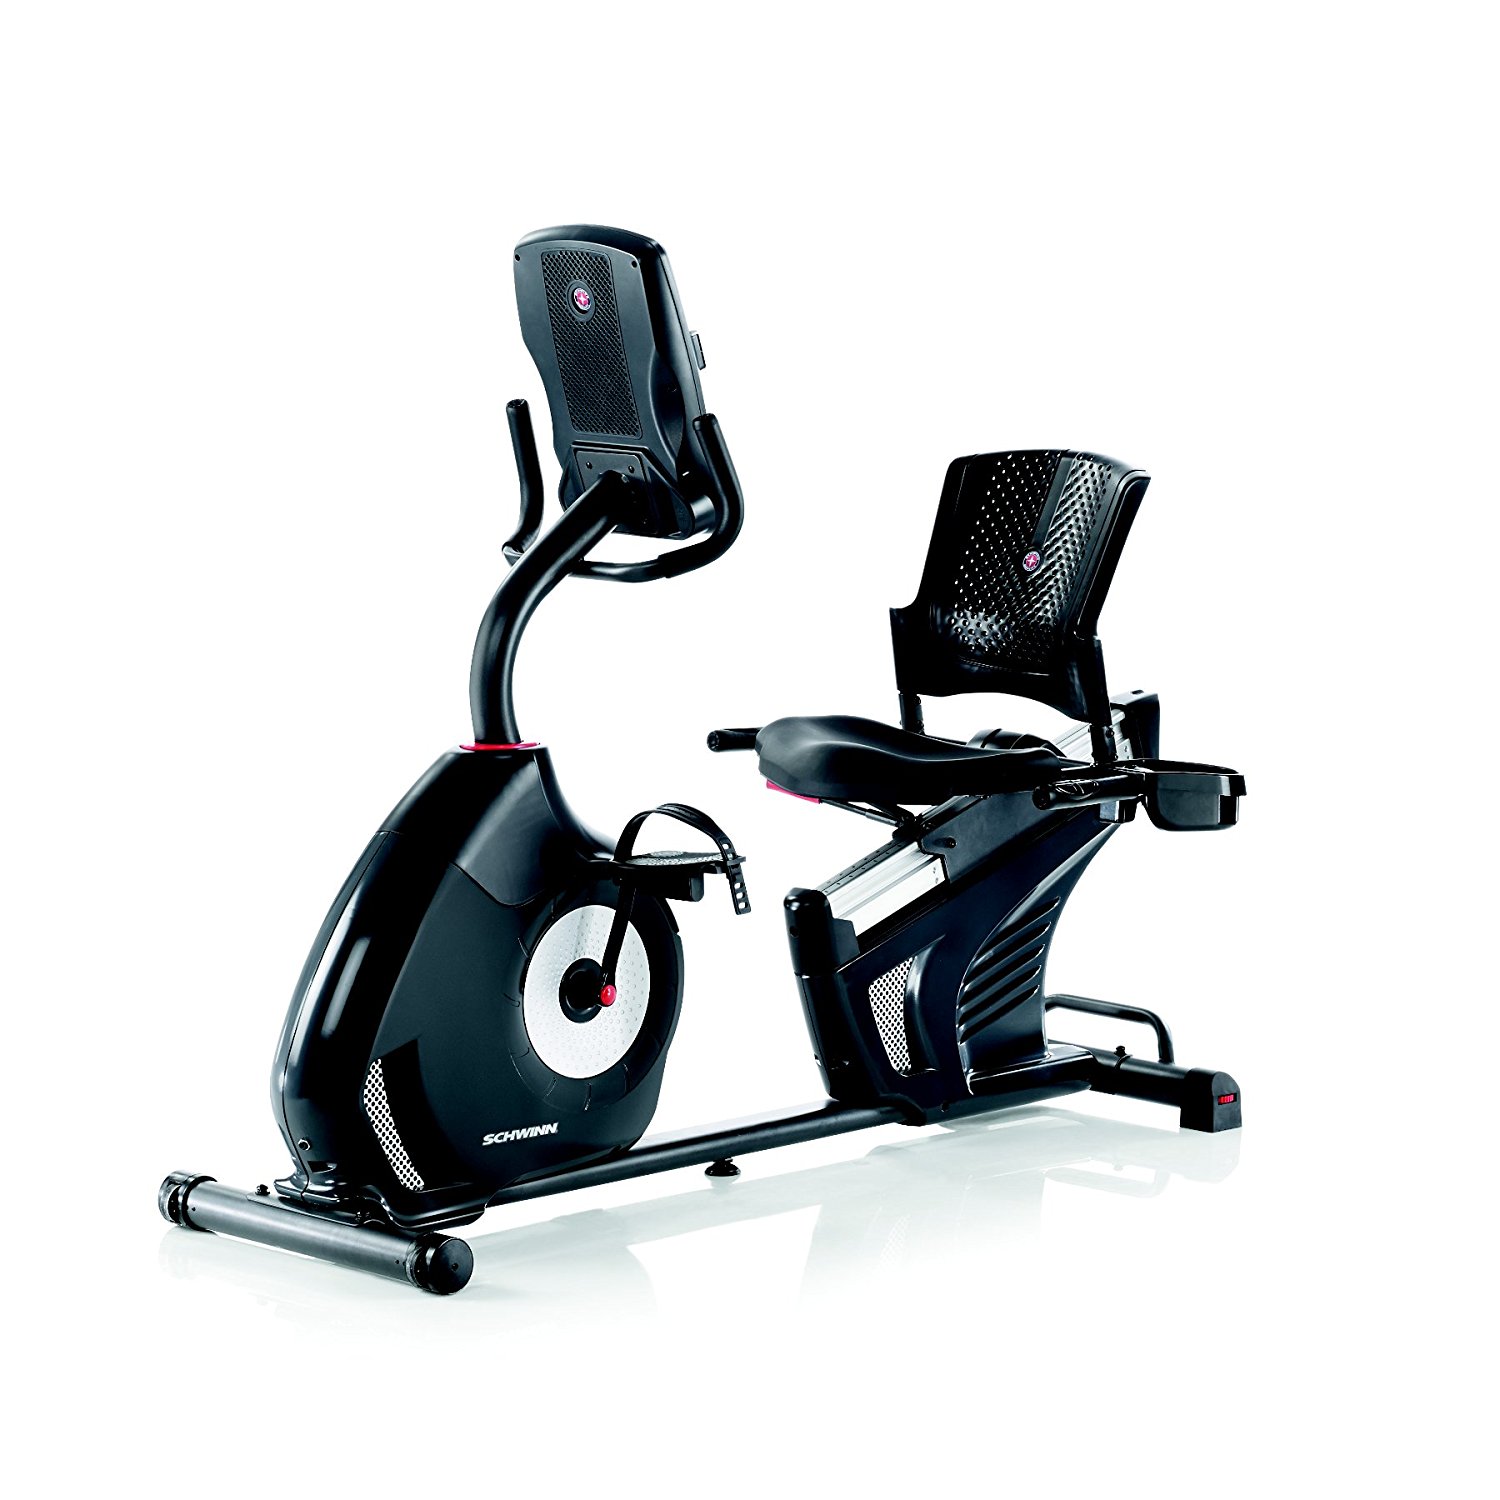 Schwinn 270 Recumbent Bike Review Benefits And Features The Outdoor